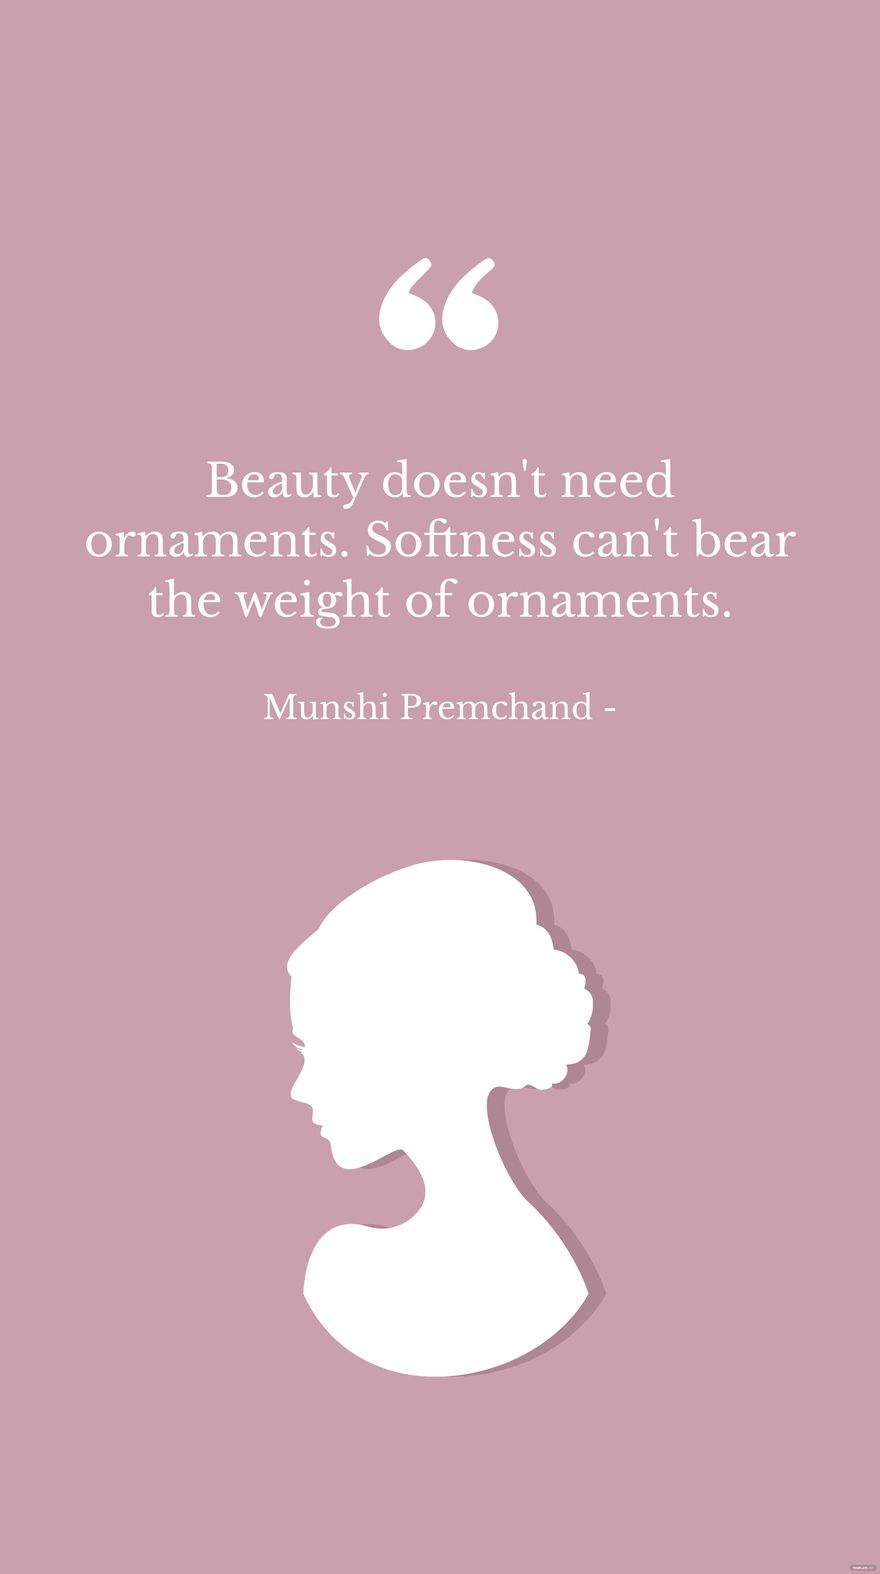 Munshi Premchand - Beauty doesn't need ornaments. Softness can't bear the weight of ornaments. in JPG